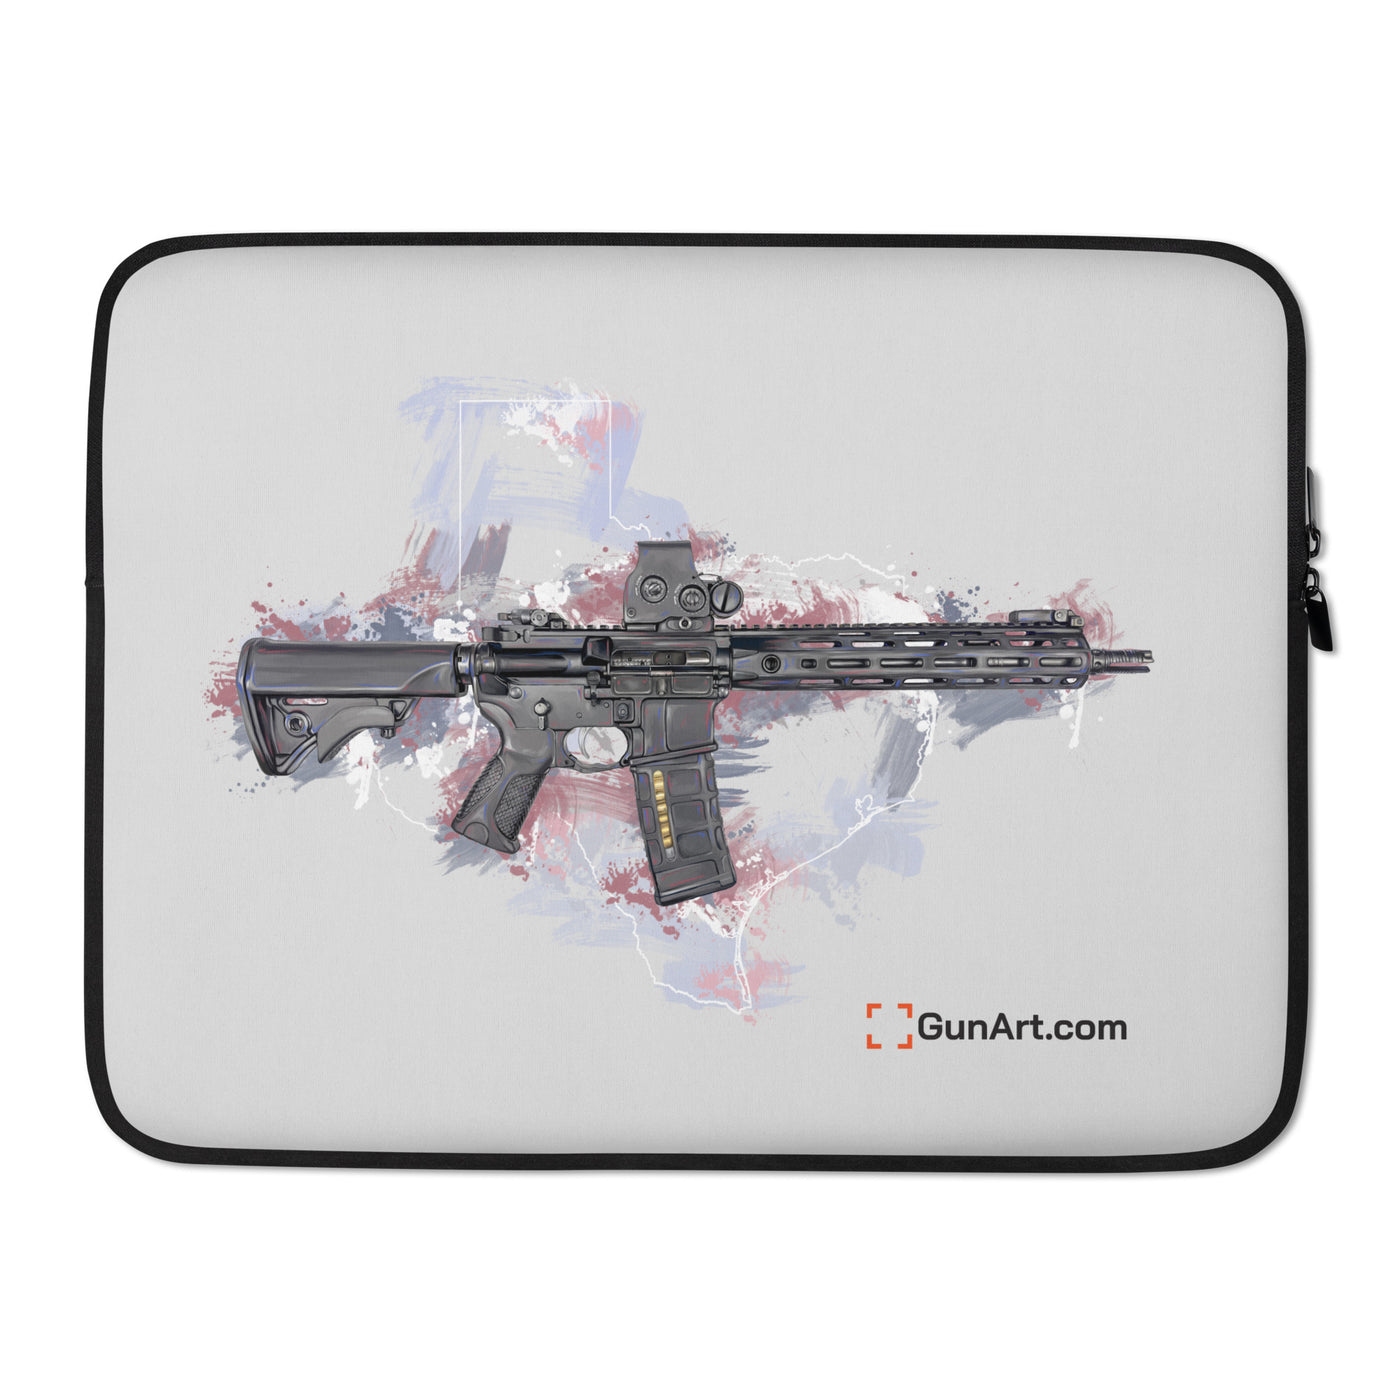 Defending Freedom - Texas - AR-15 State Laptop Sleeve - White State